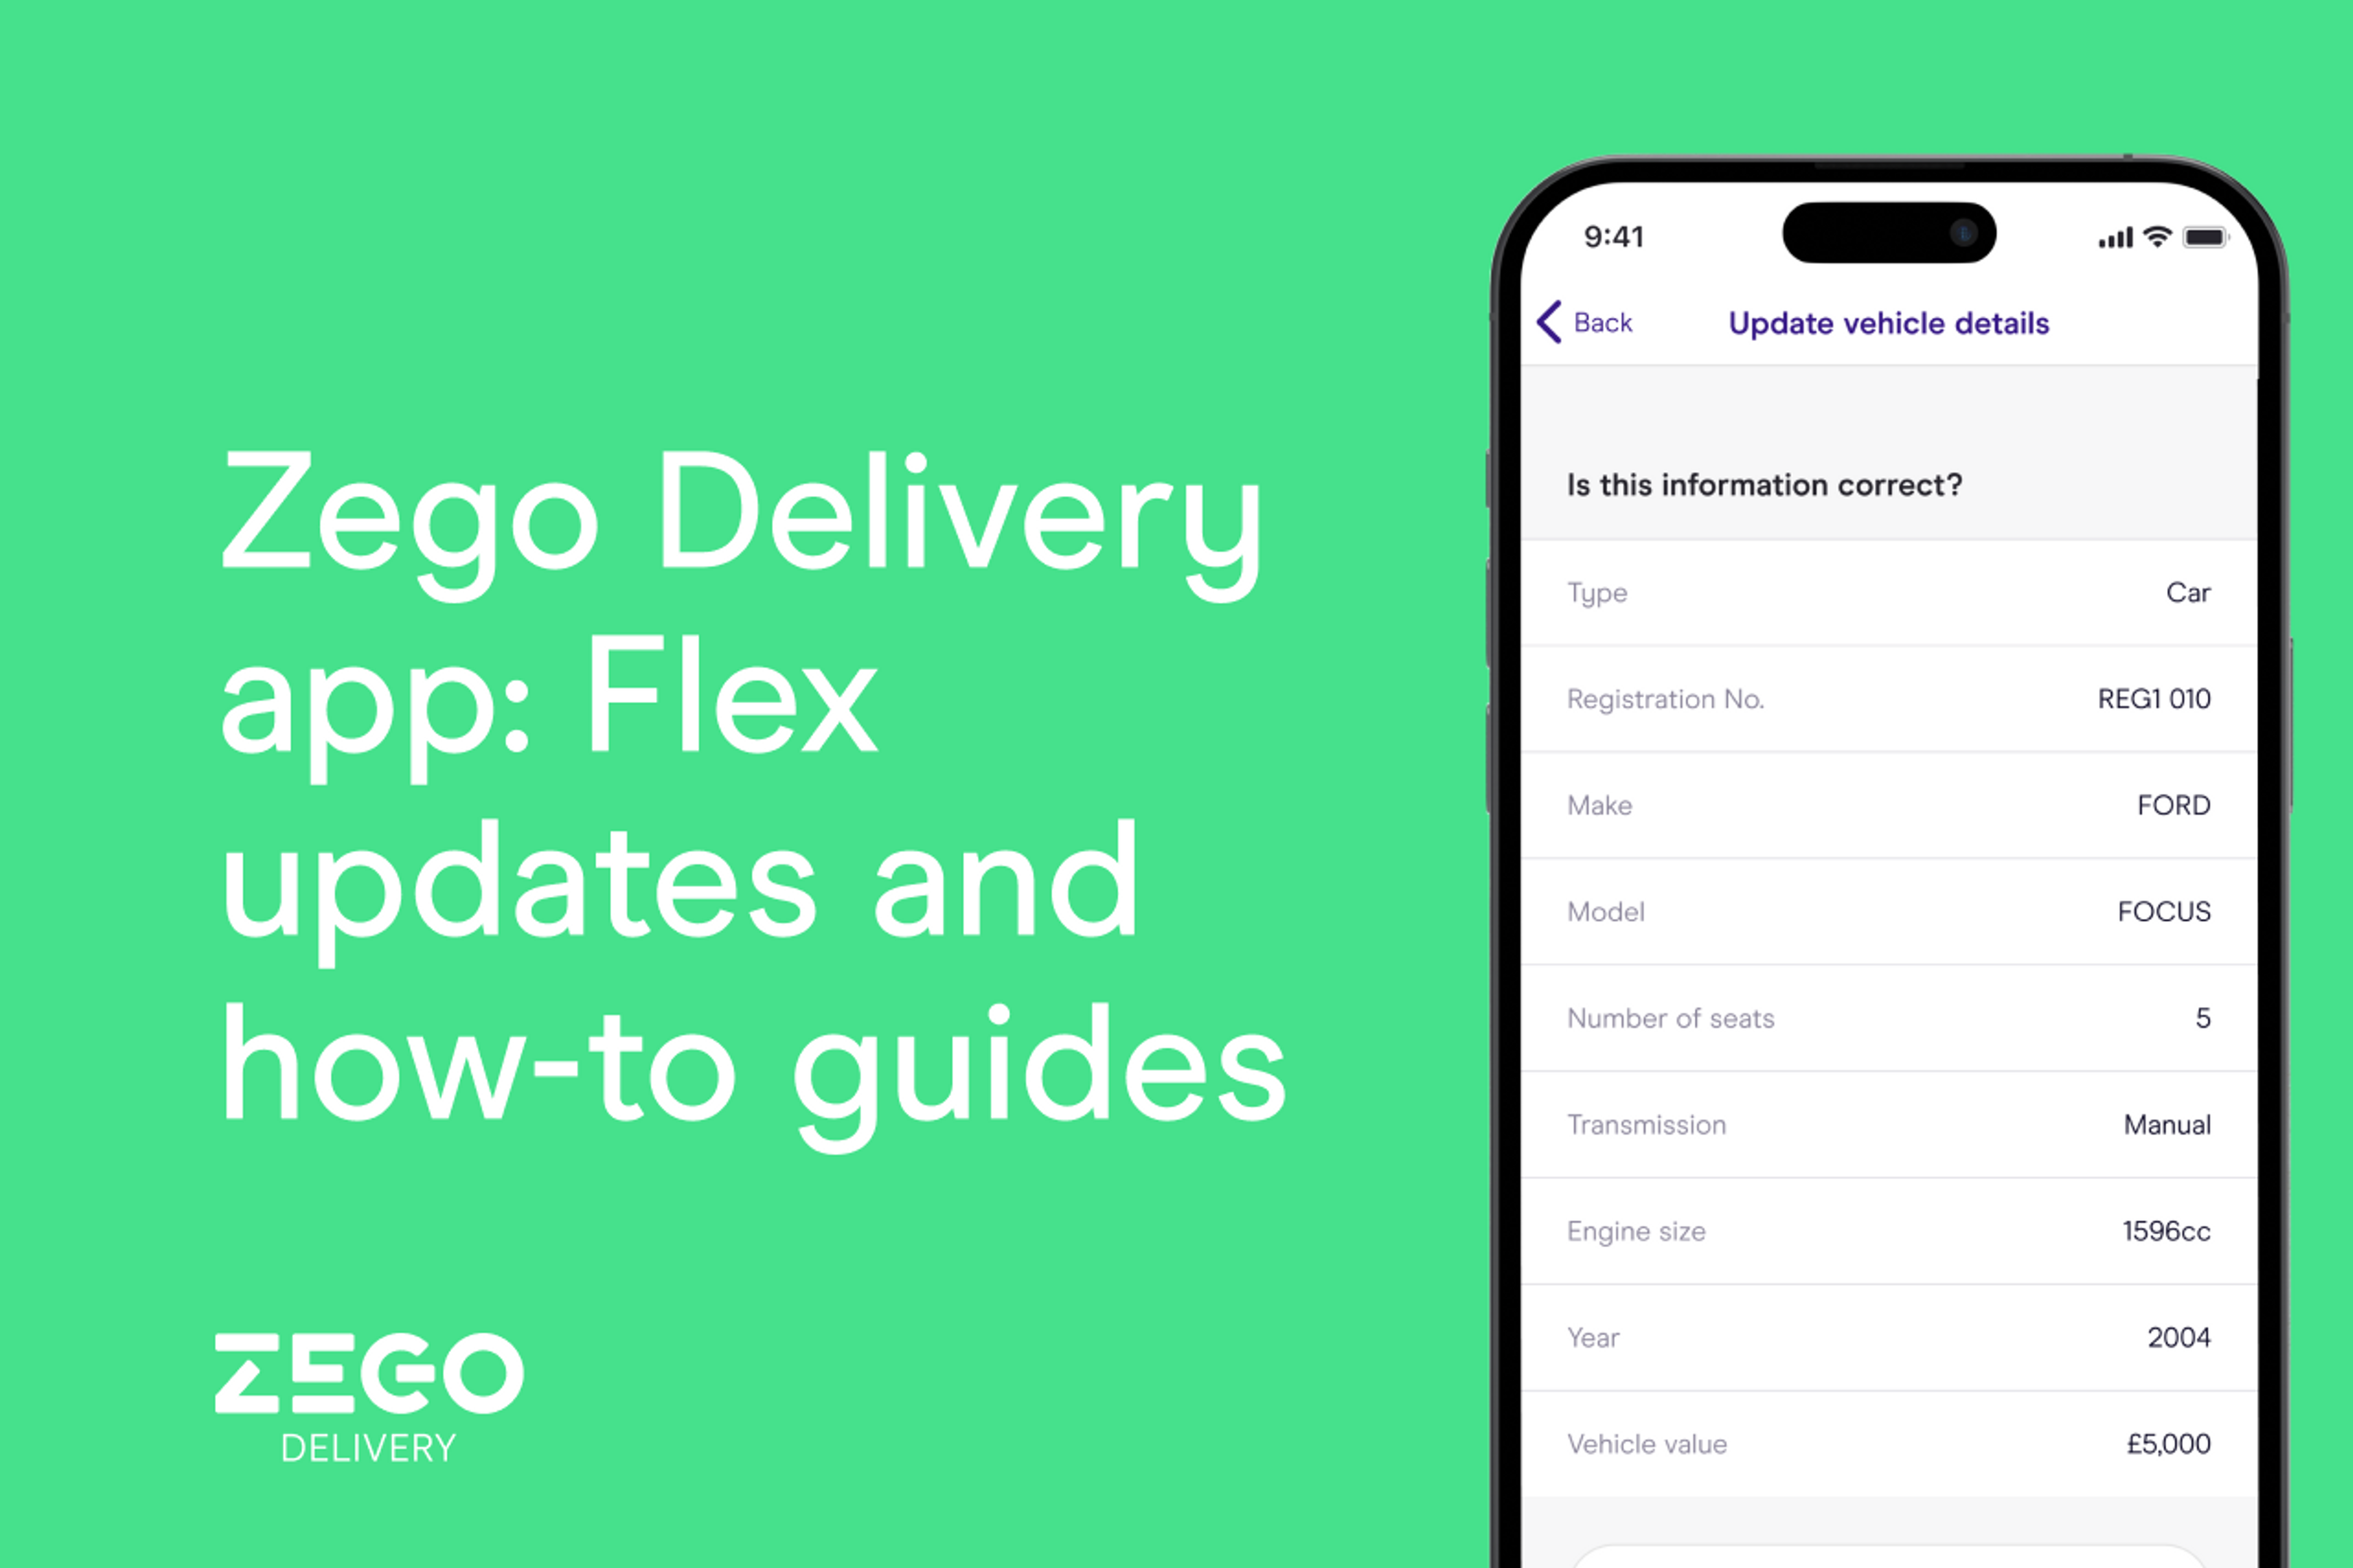 Zego Delivery app updates and guides